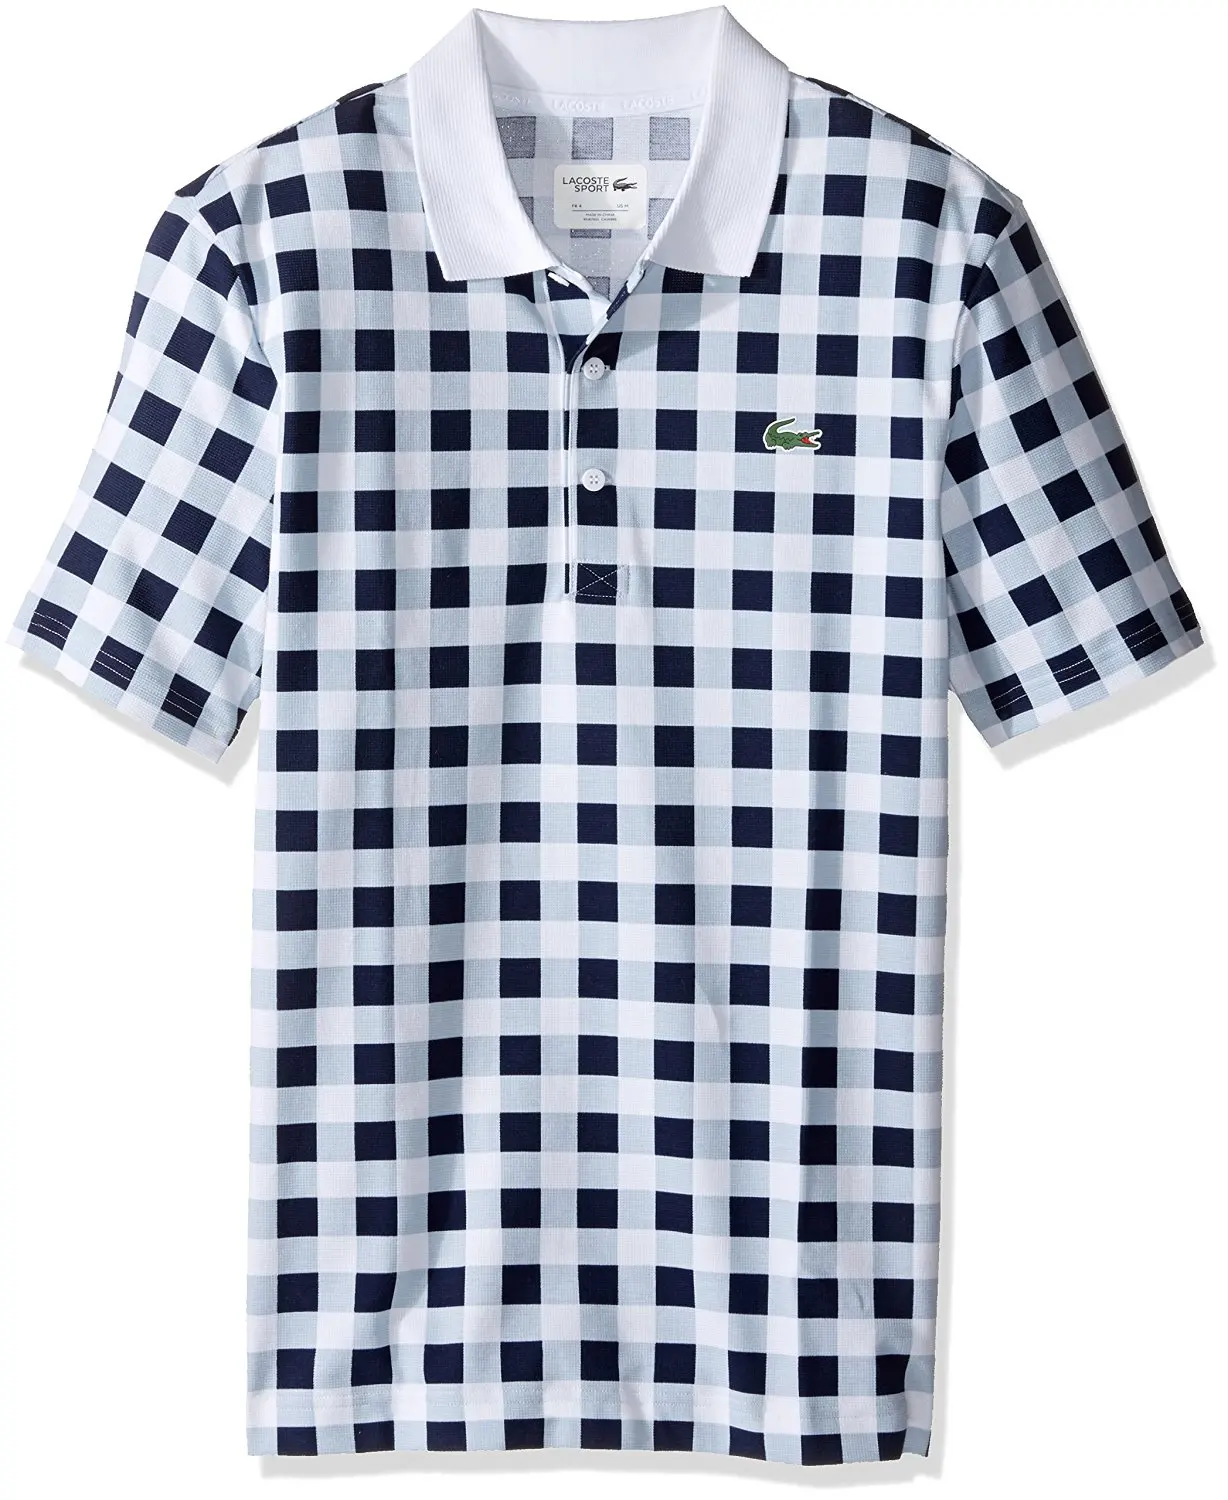 lacoste mens golf shirts